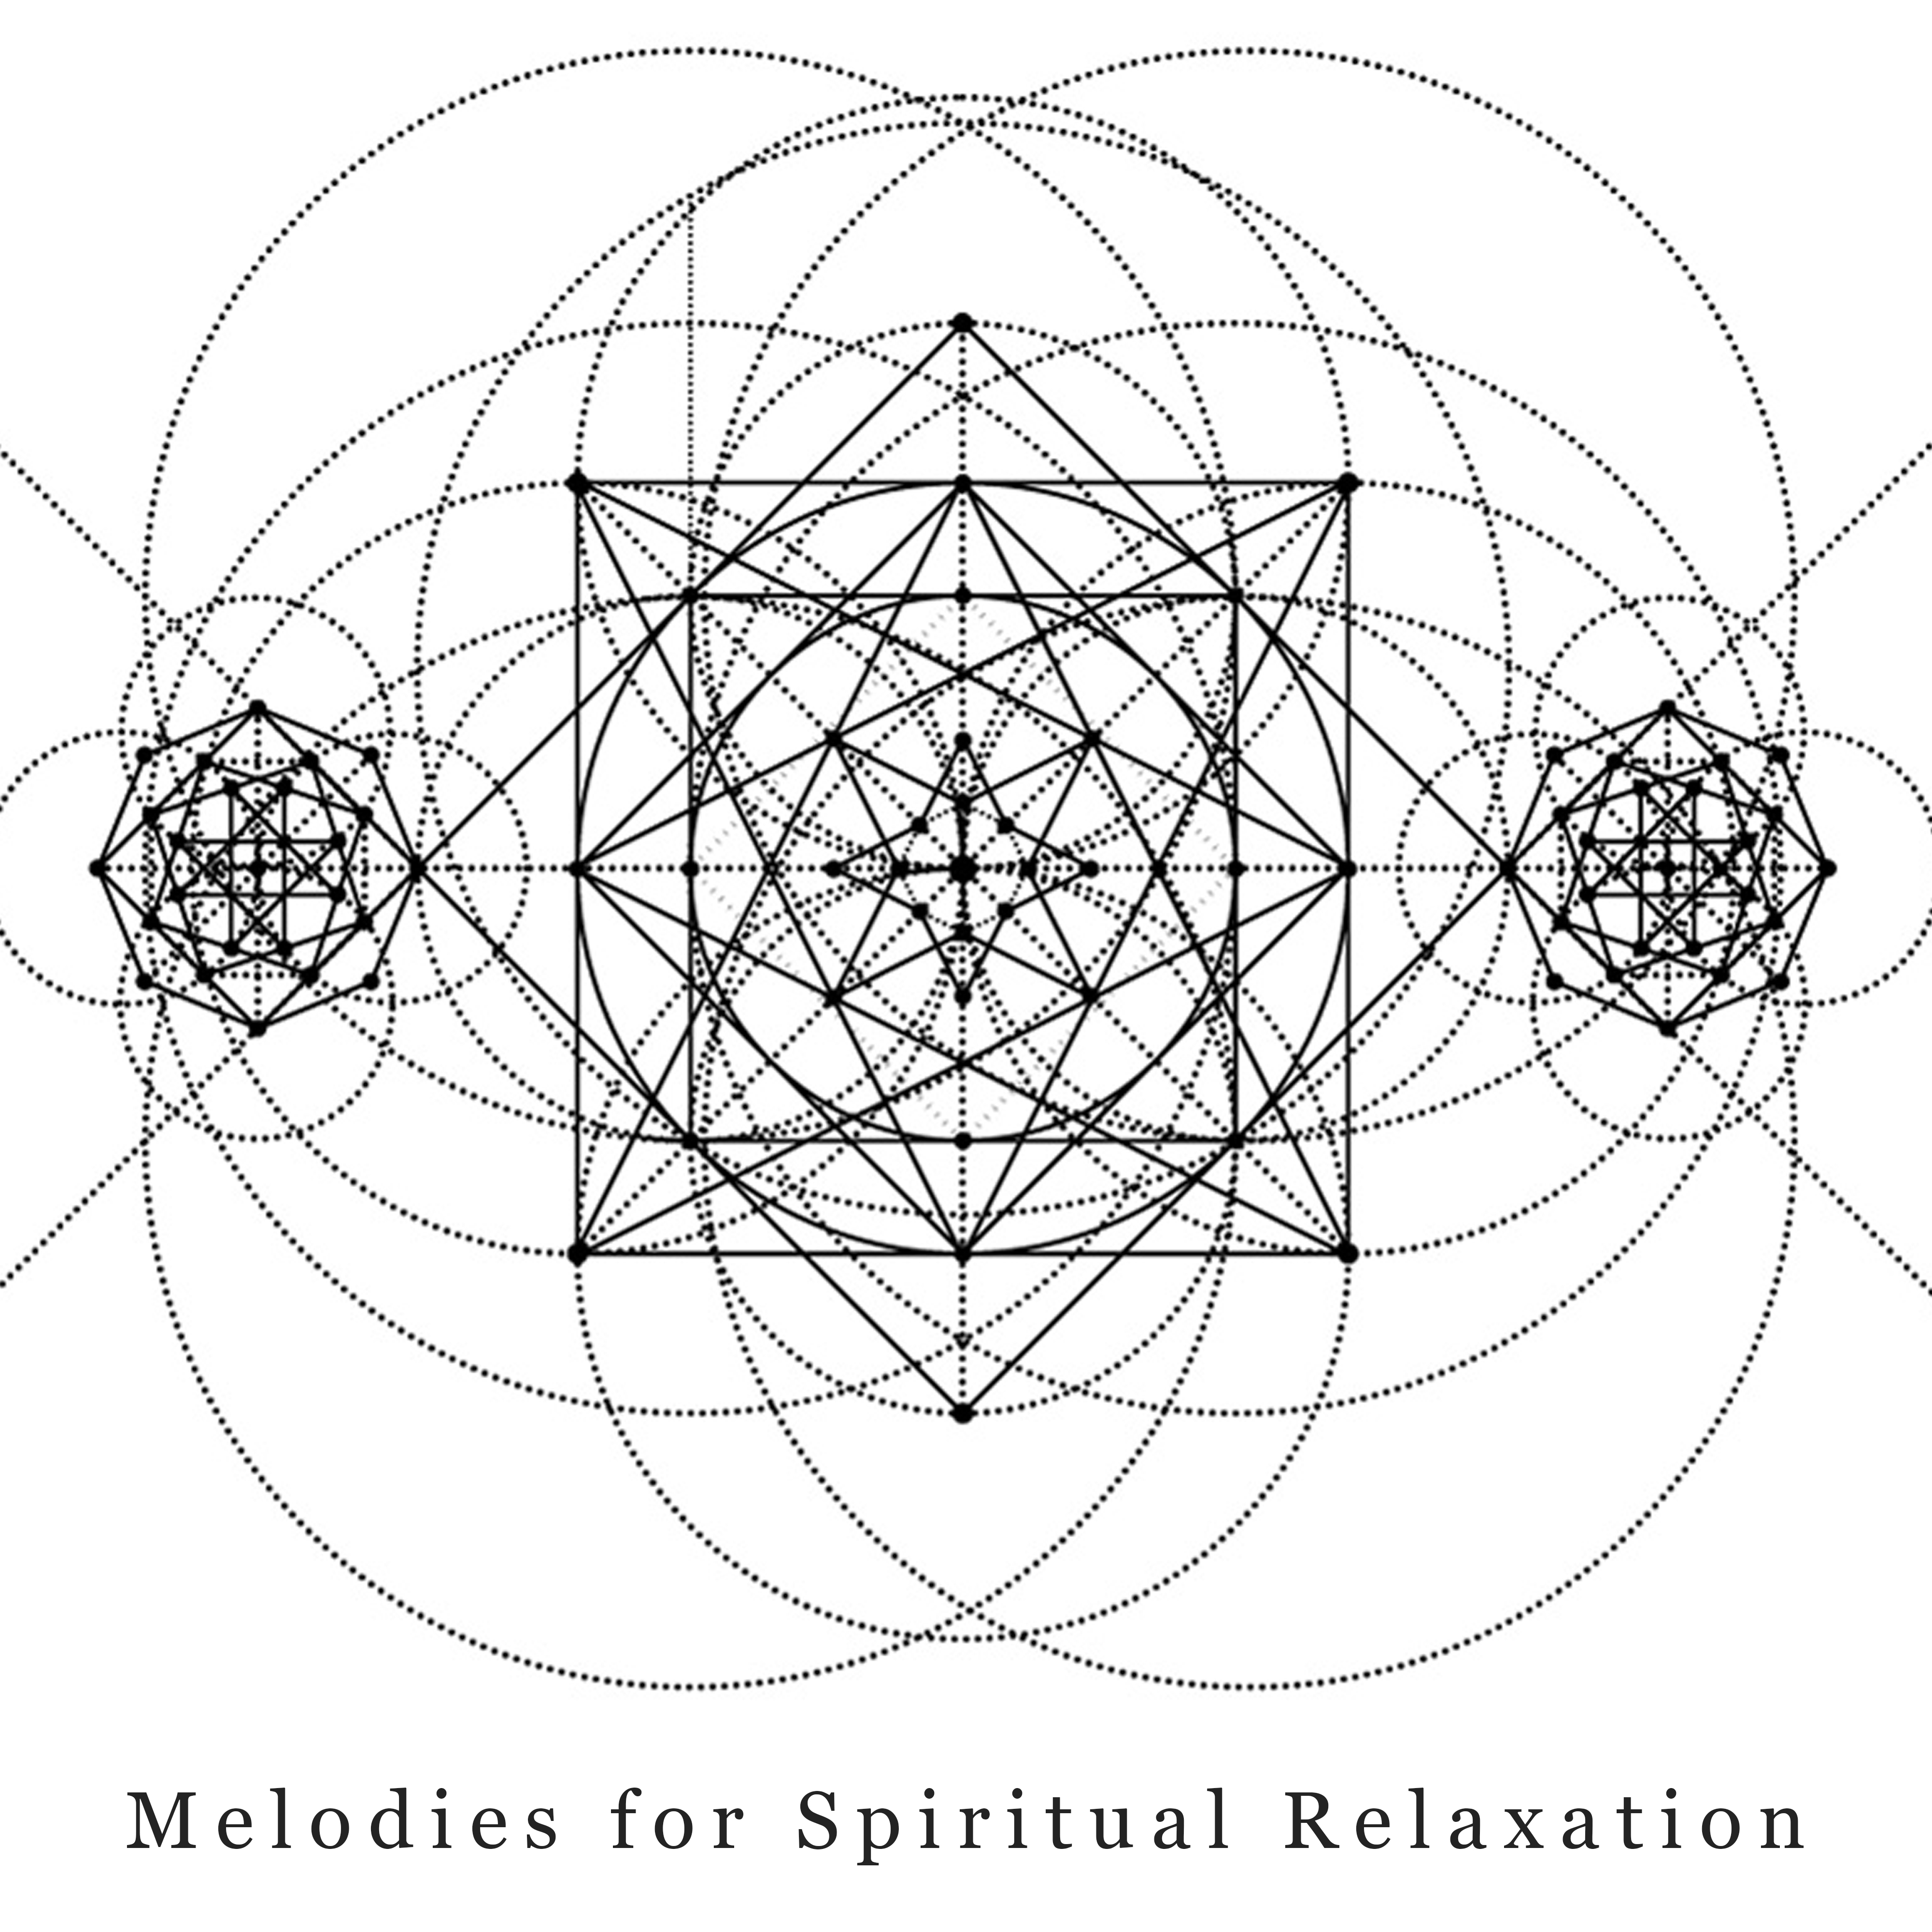 Melodies for Spiritual Relaxation